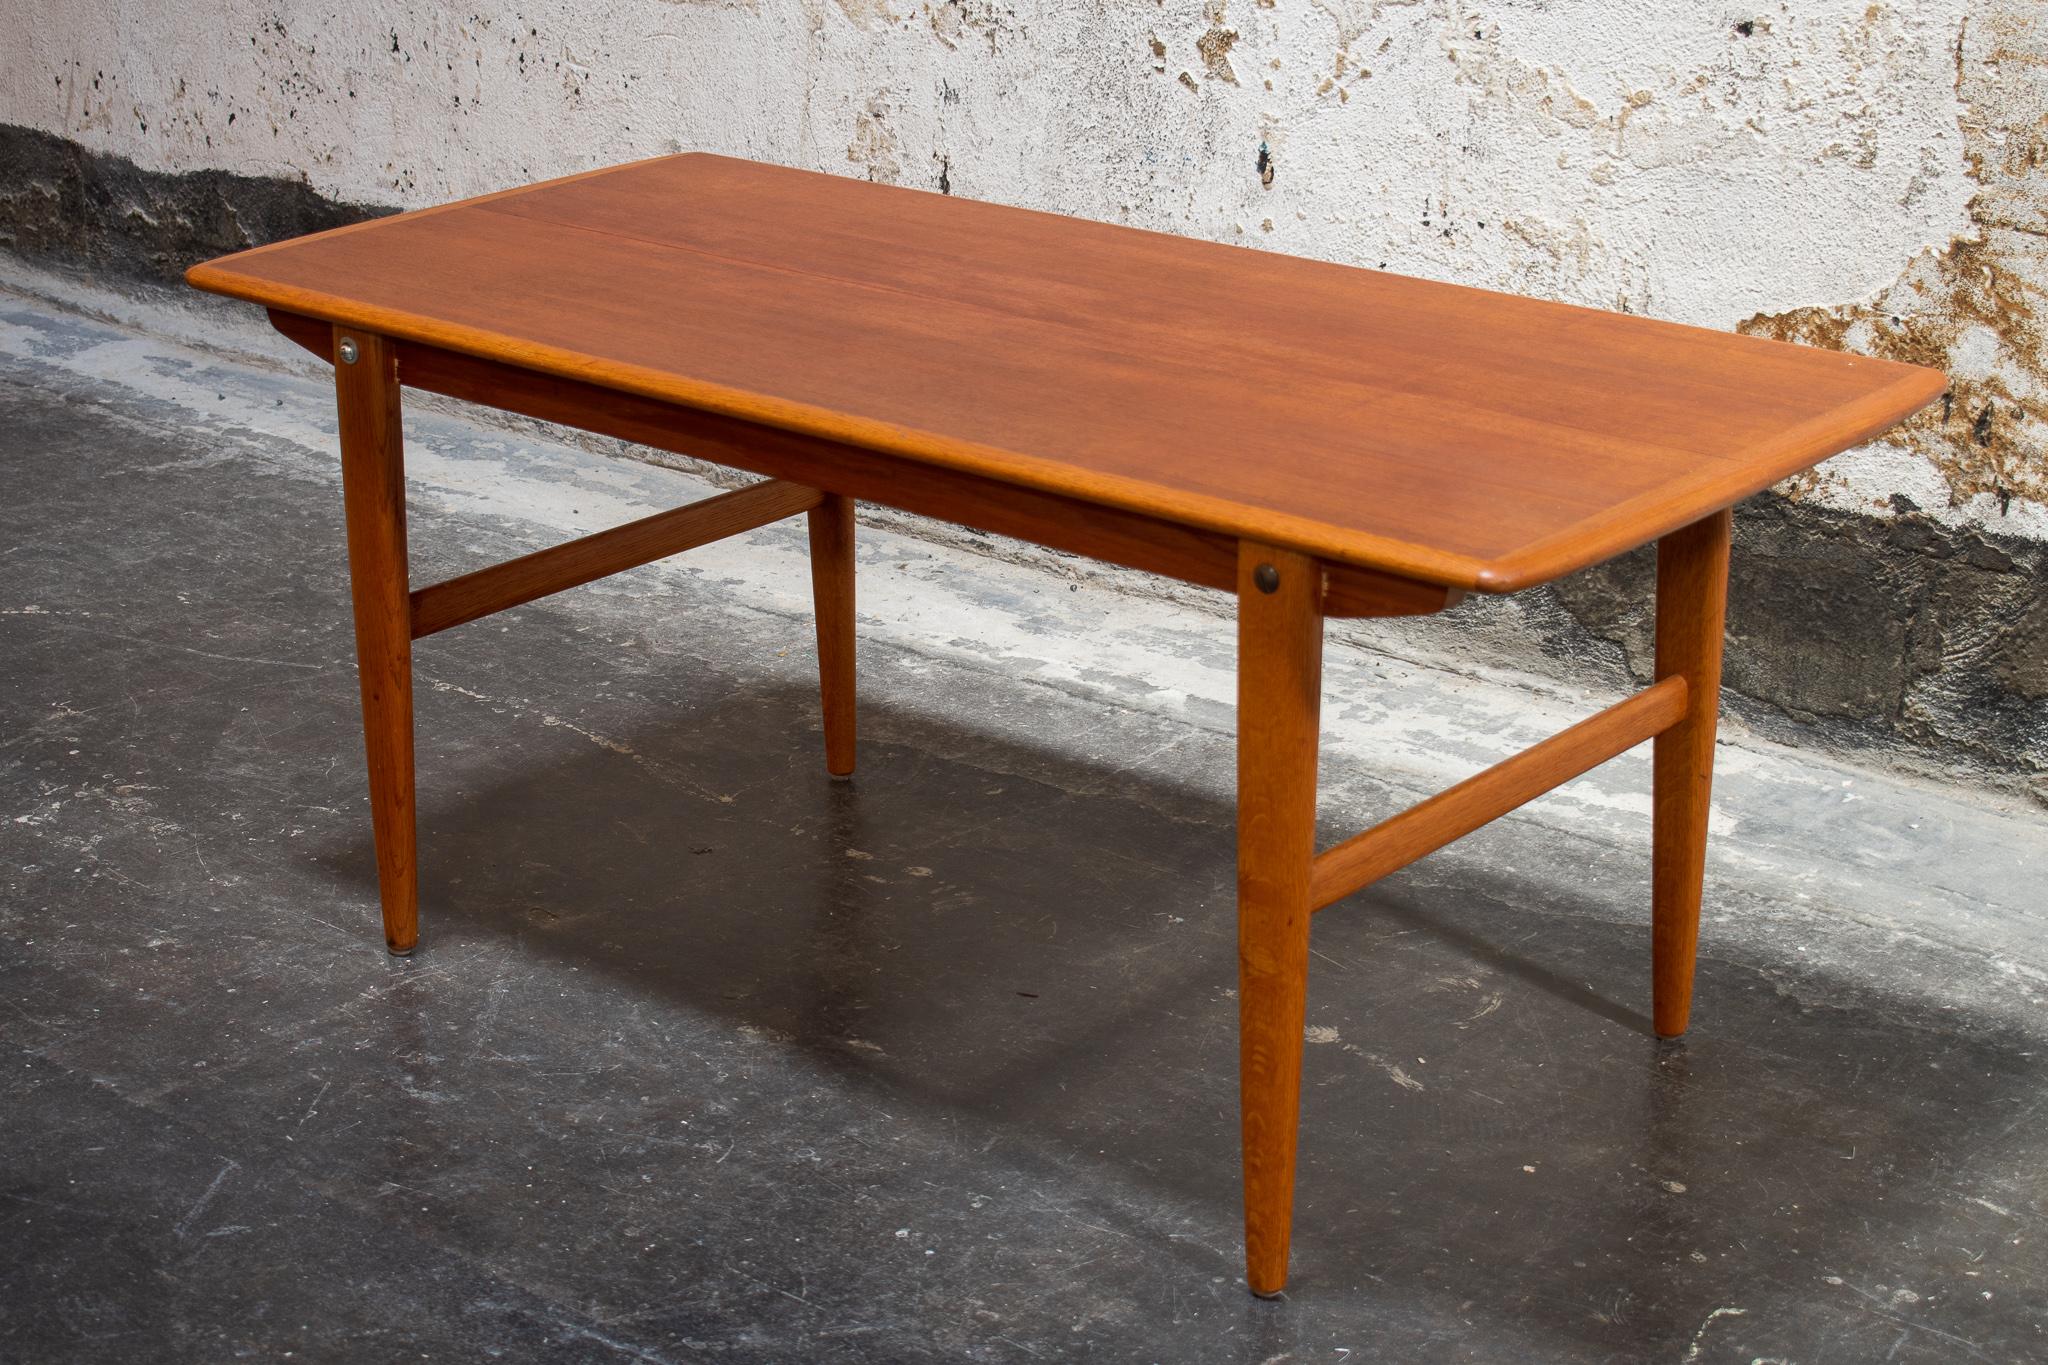 Mid-Century Teak coffee-table, made in Sweden c. 1950, featuring rounded edges and legs.

Coffee table is adjustable and can be listed to small dining table/card table height, however, leaf is not included with piece.